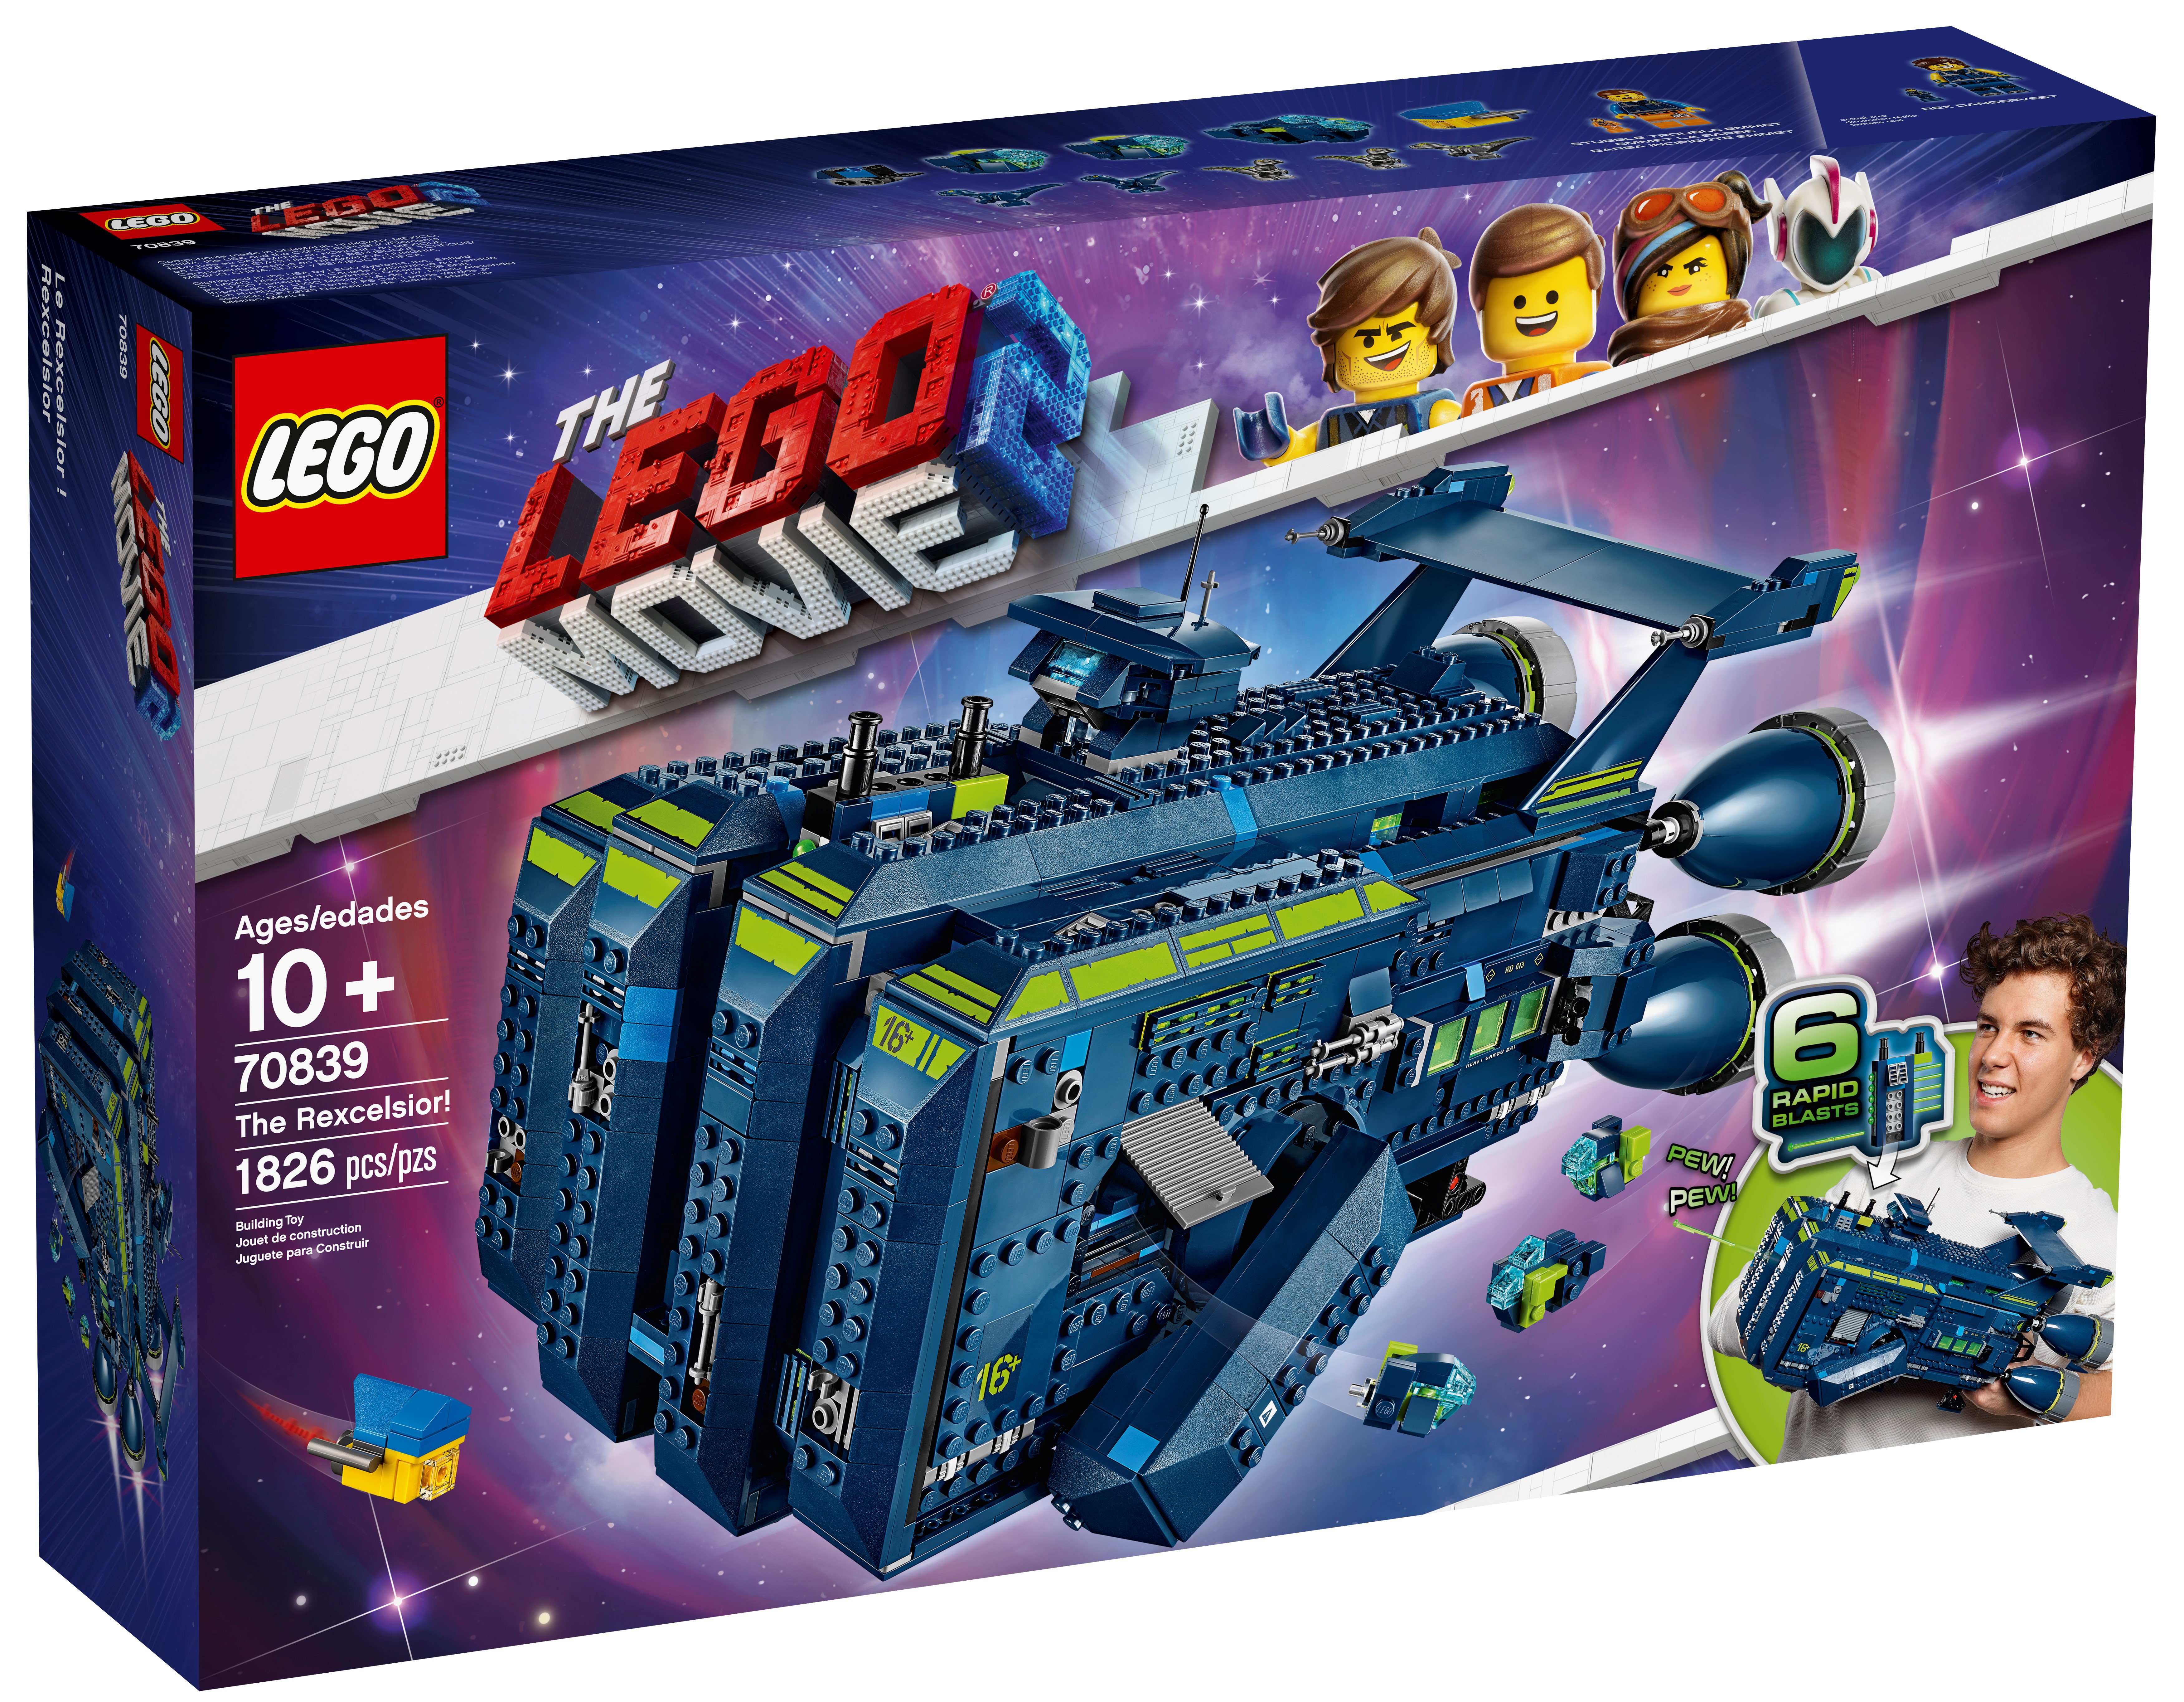 The Rexcelsior! 70839 | THE LEGO® MOVIE 2™ | Buy online at the